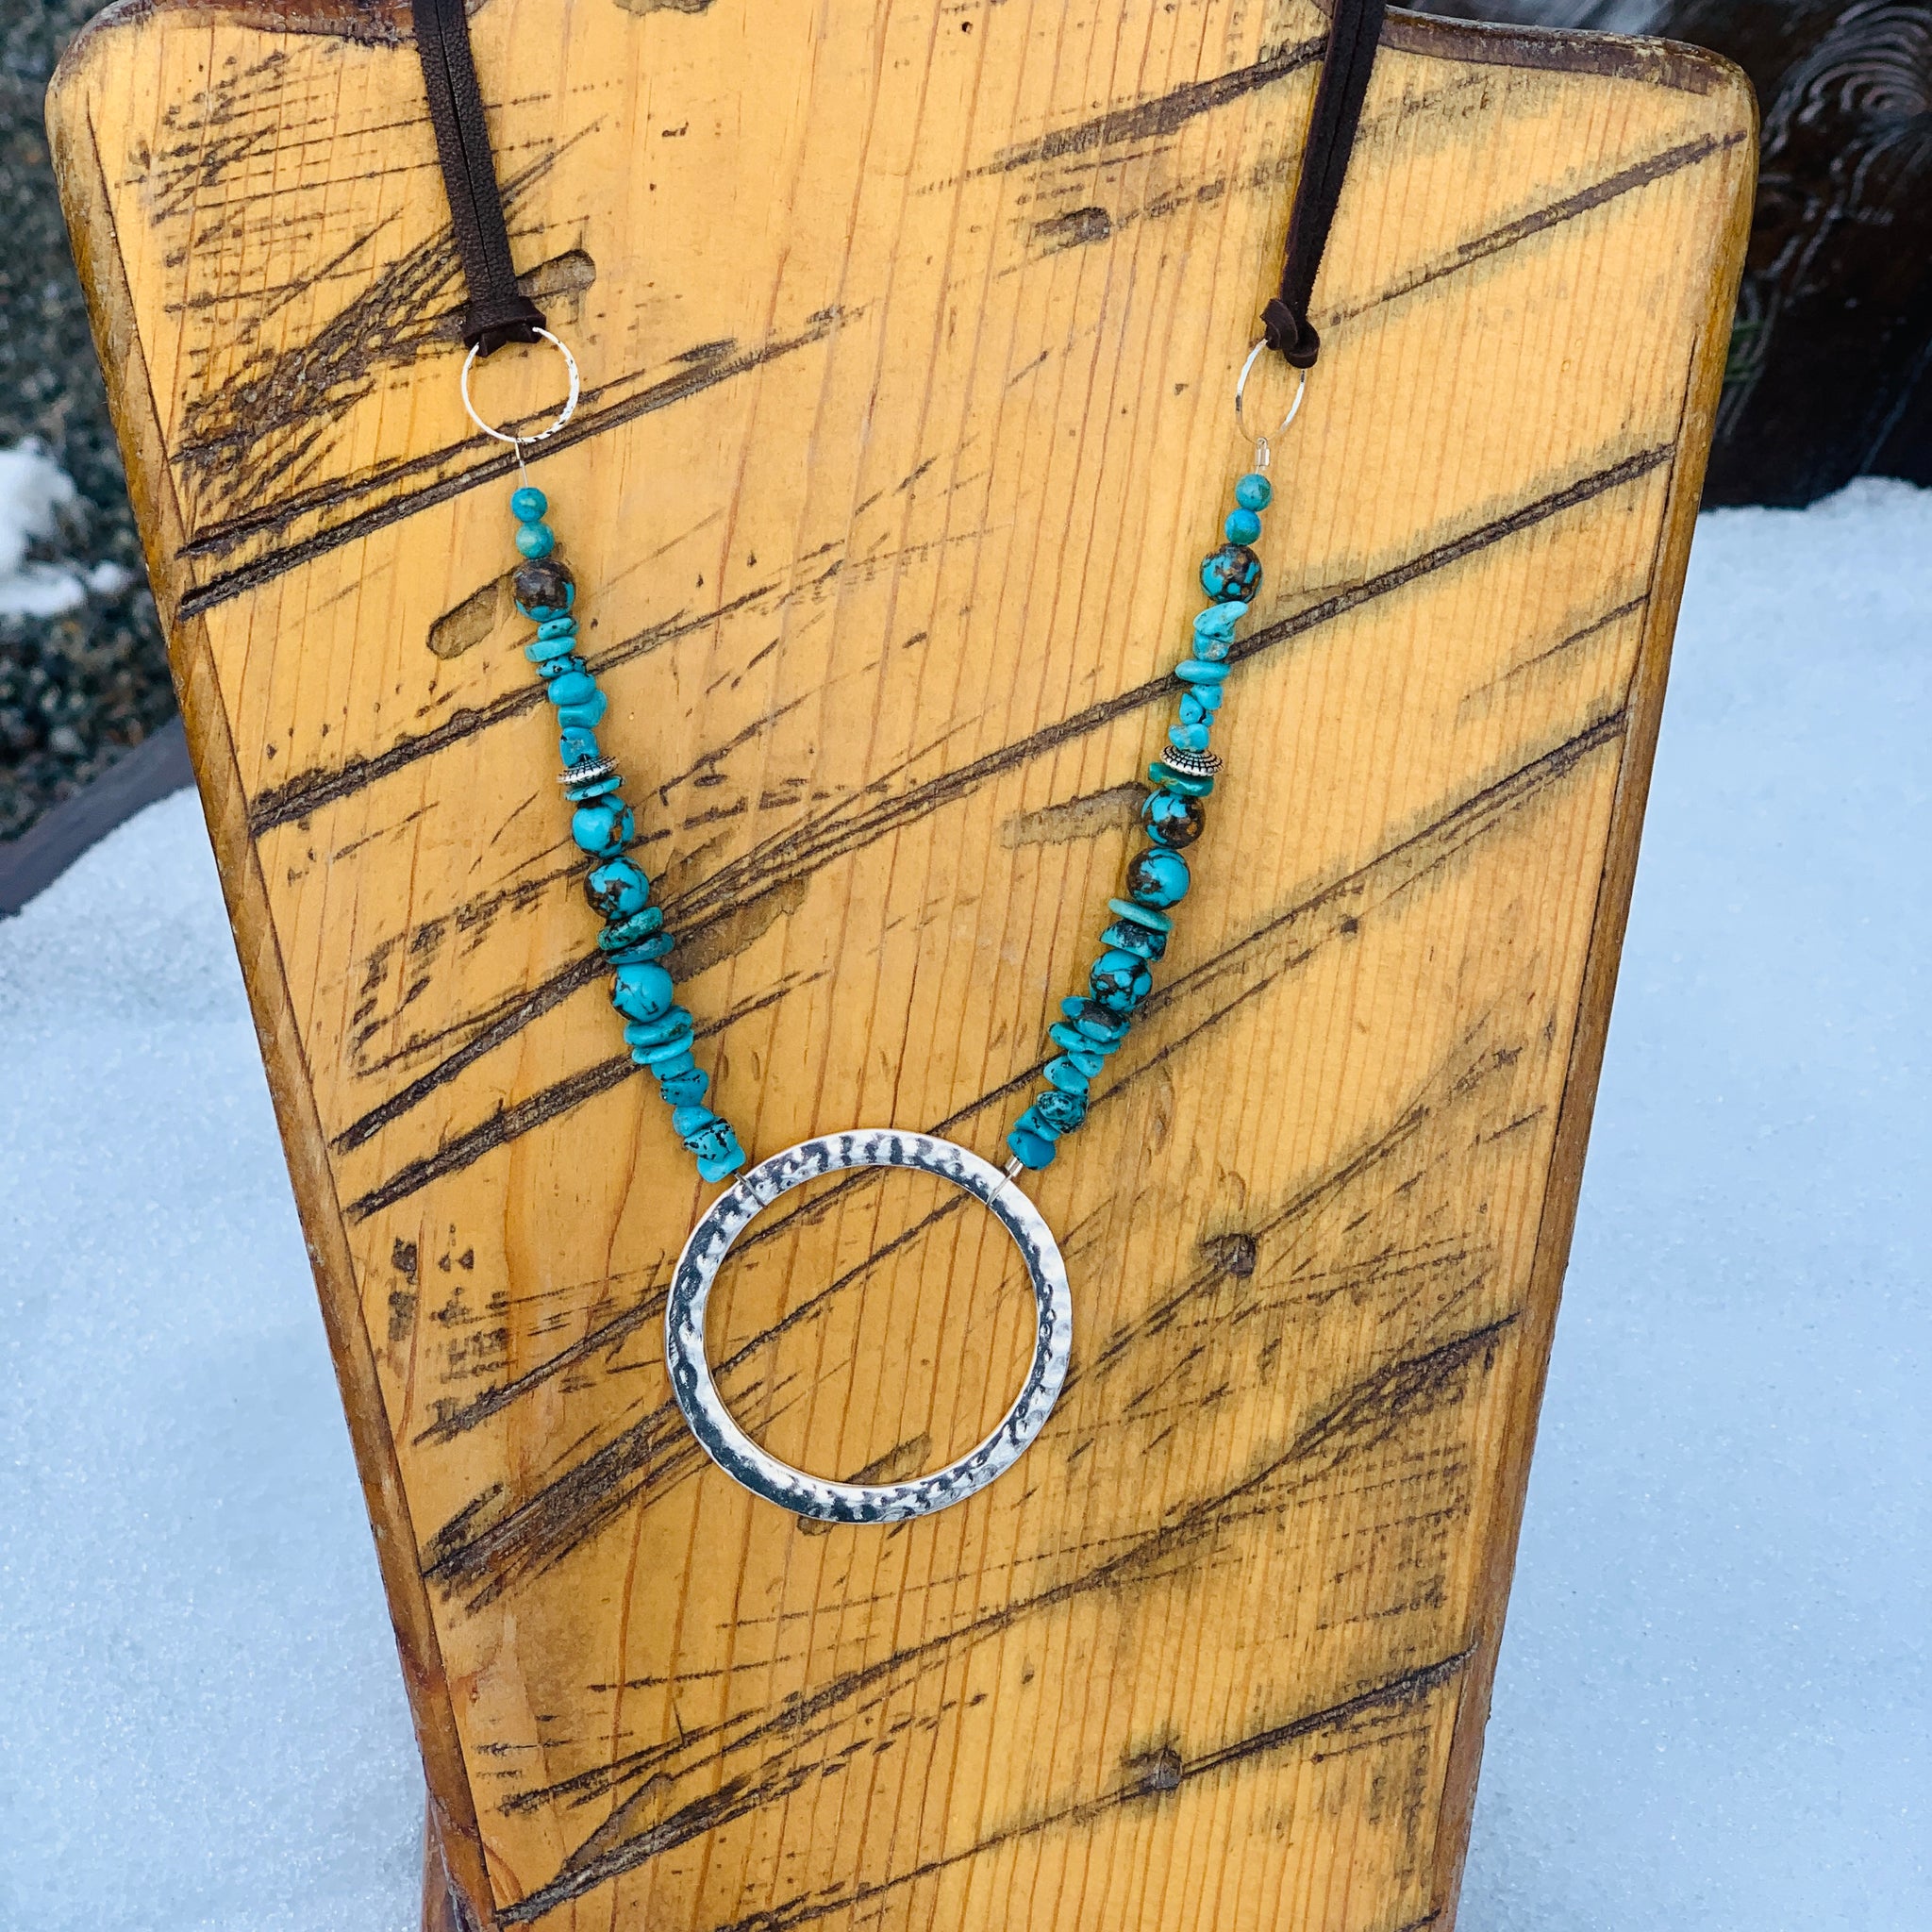 turquoise necklace shop necklace rings bracelets necklace jewelry store western apparel nfr fashion navajo pearls gemstones idaho gift shop